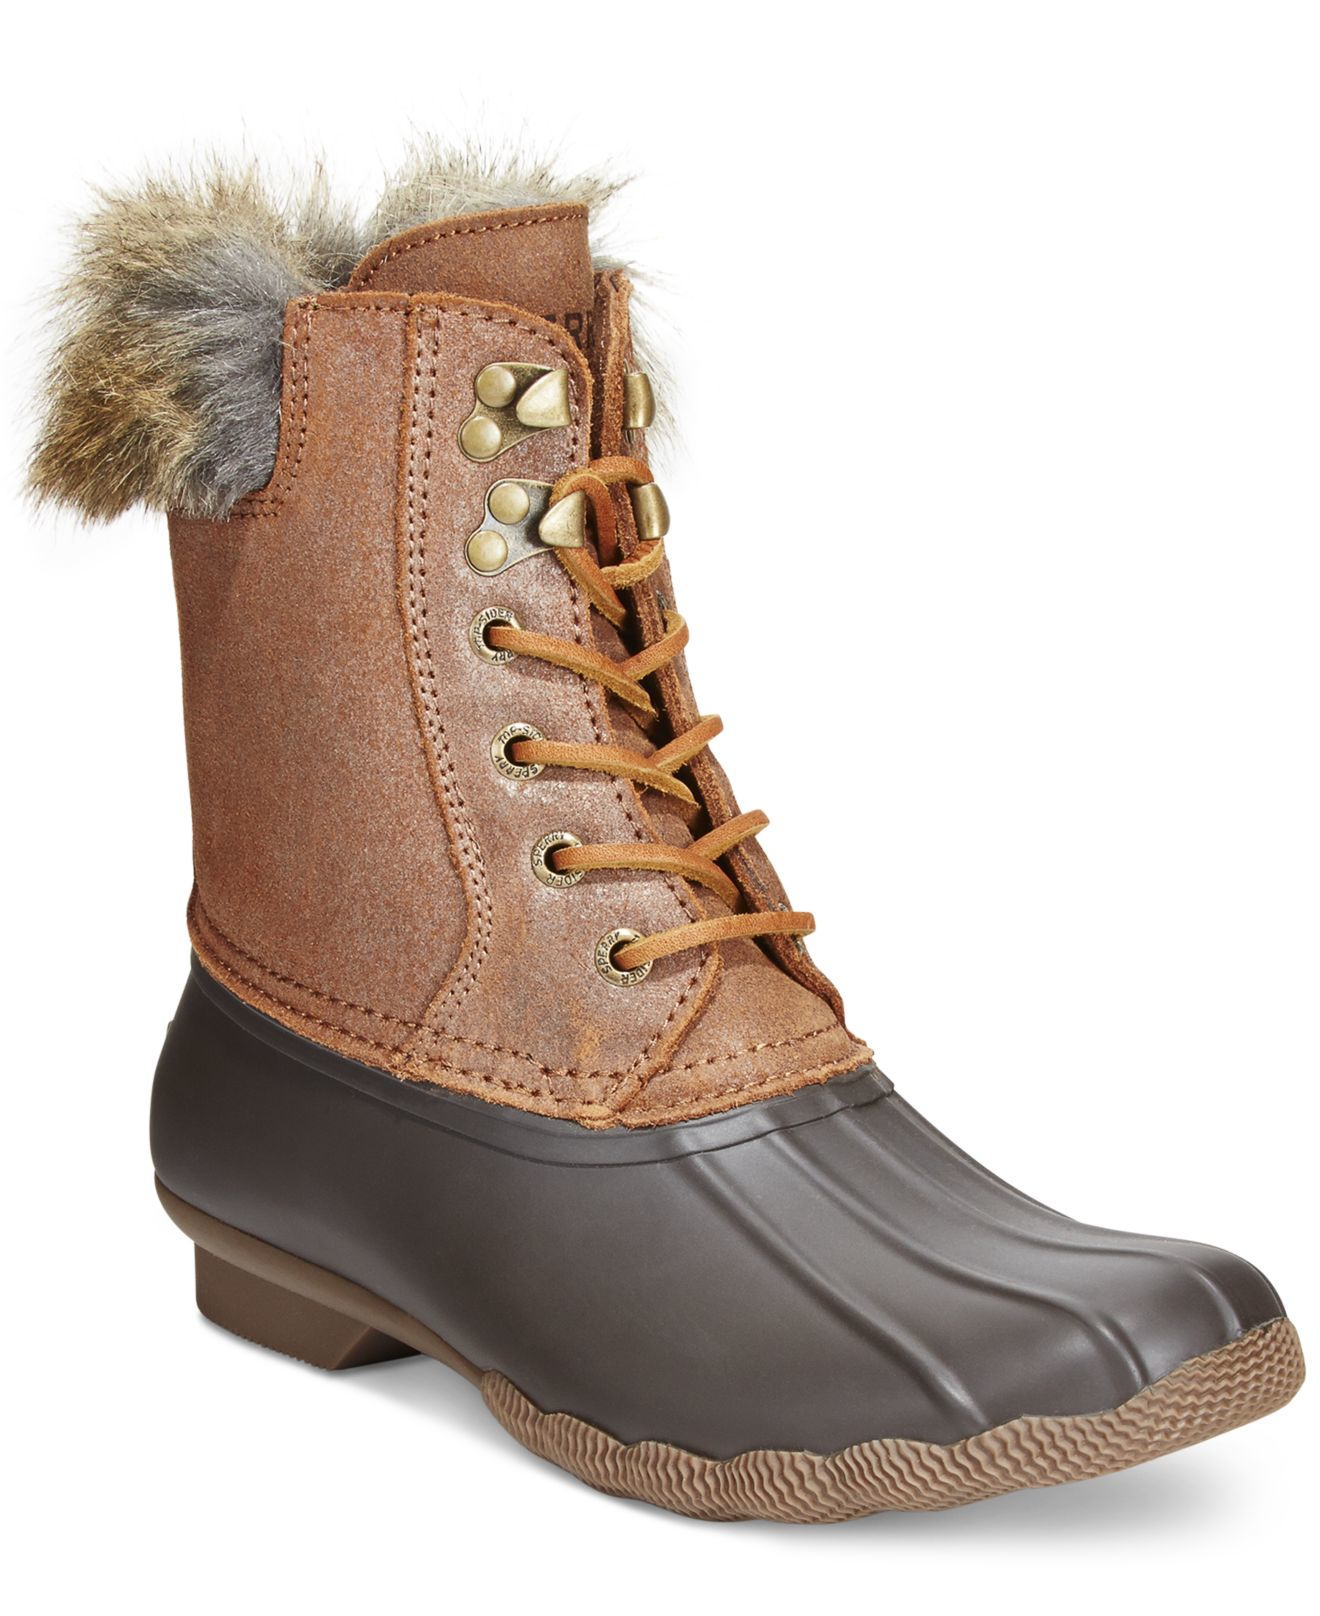 Sperry top-sider Saltwater Misty Thinsulate Waterproof Duck Boots in